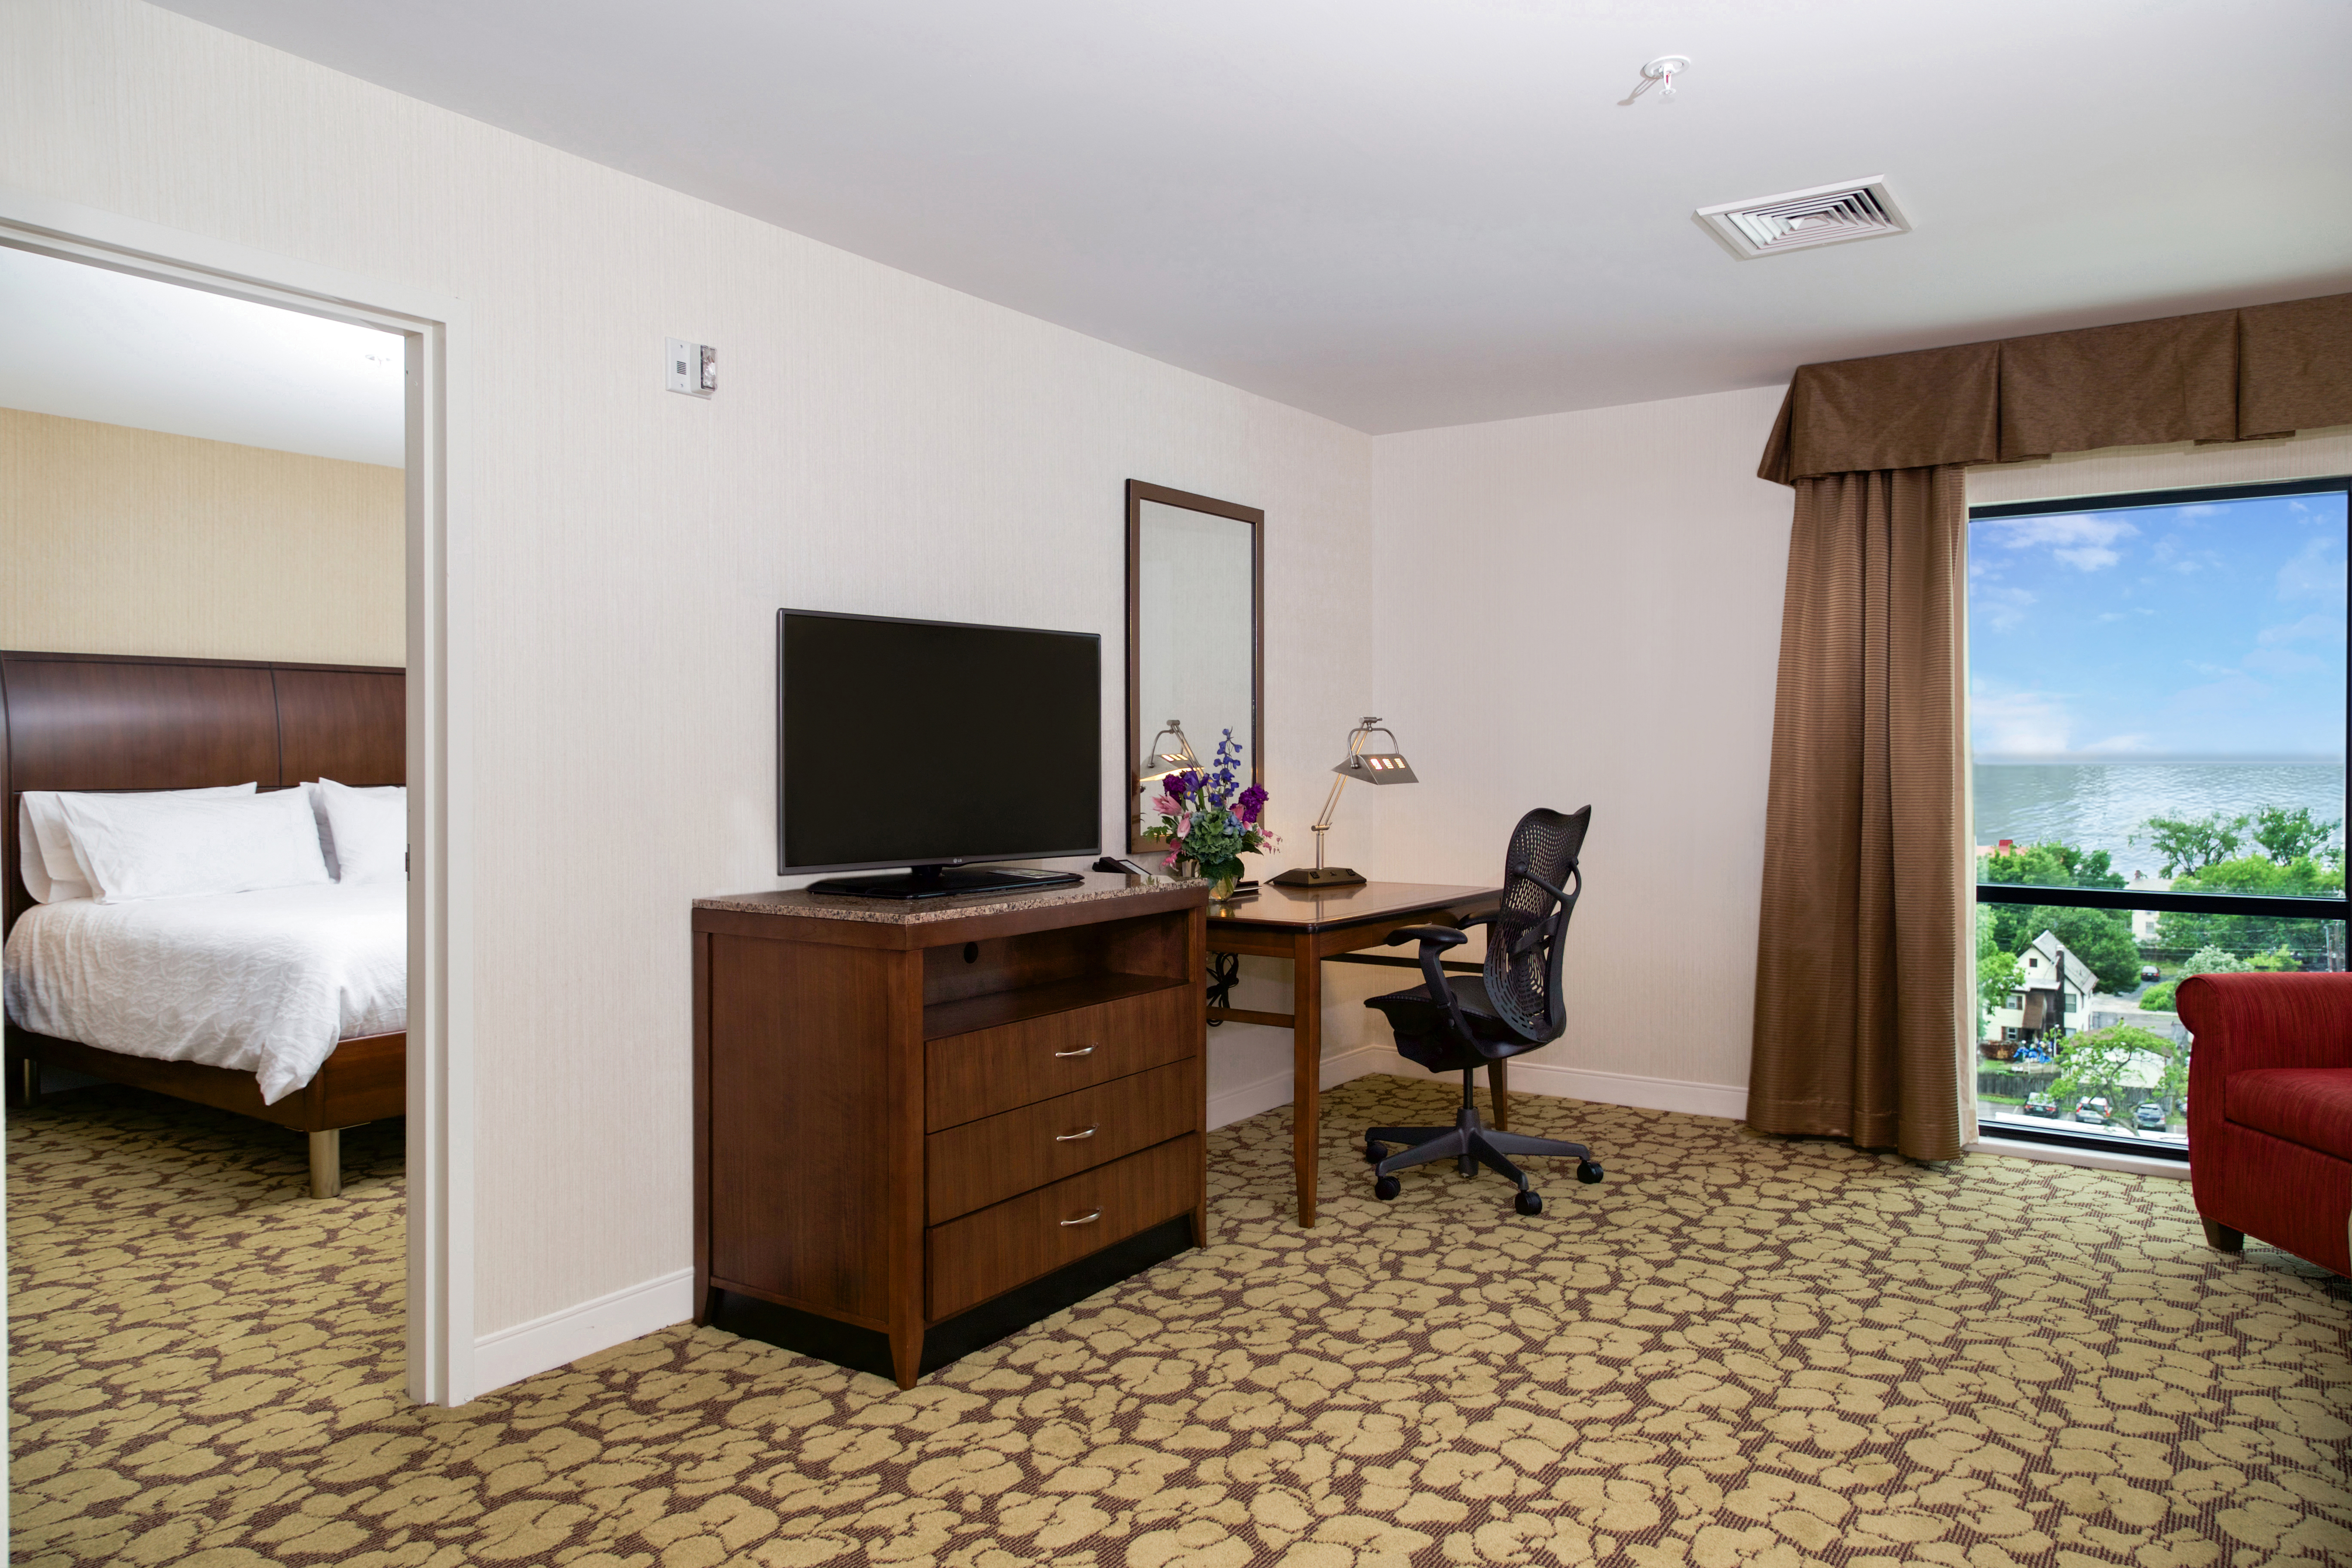 King Suite bed and Desk with TV